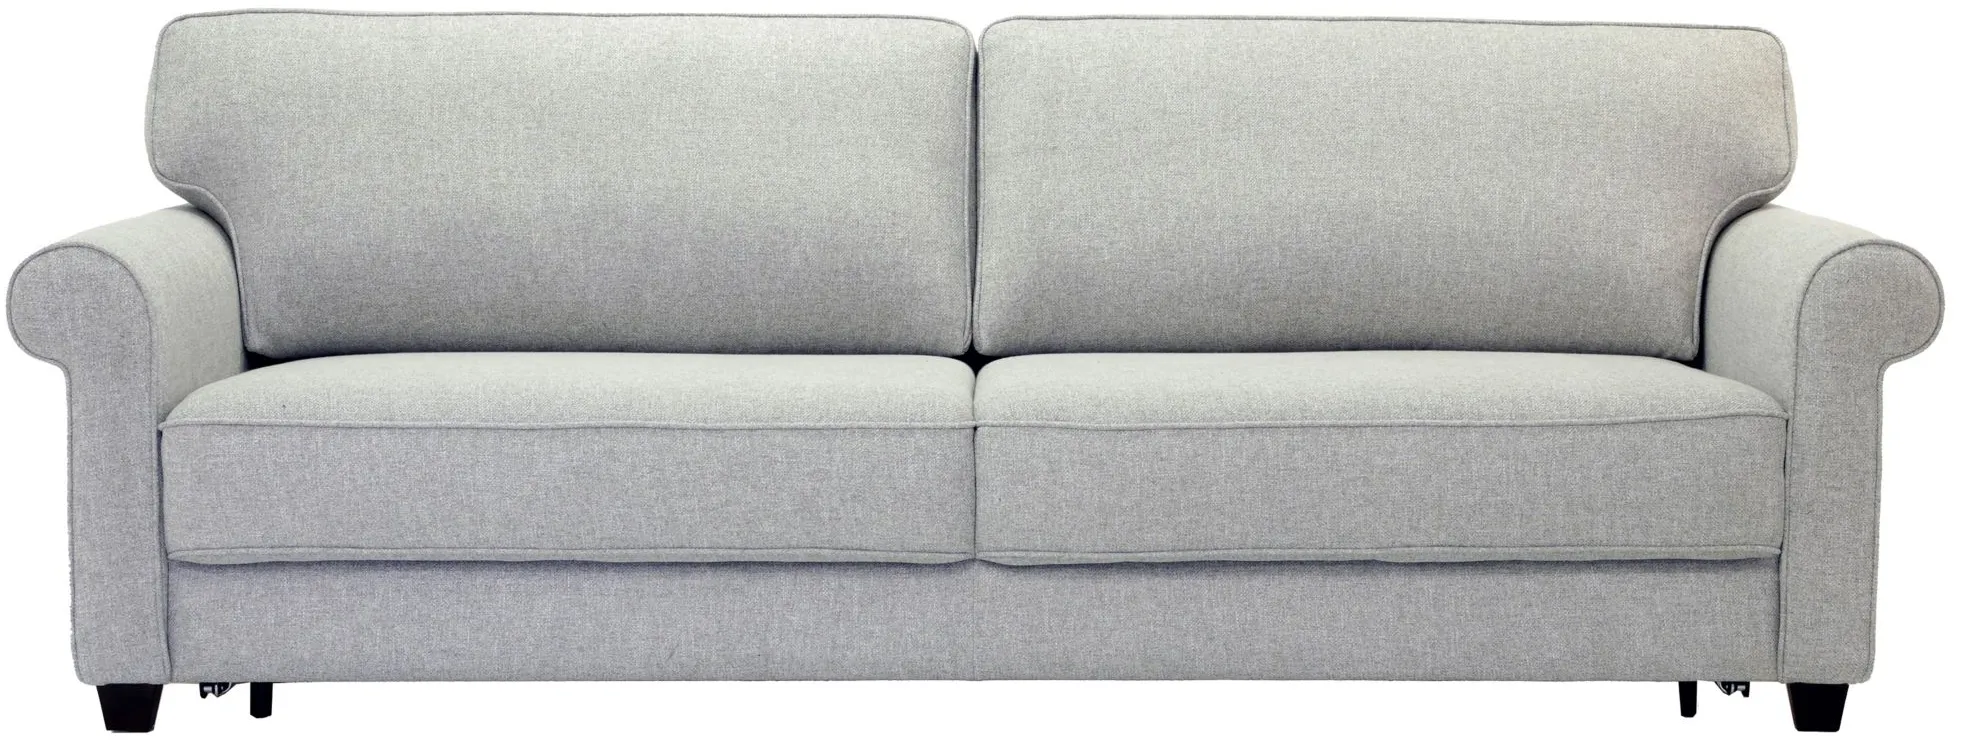 Casey King Sofa Sleeper in Rene 01 by Luonto Furniture